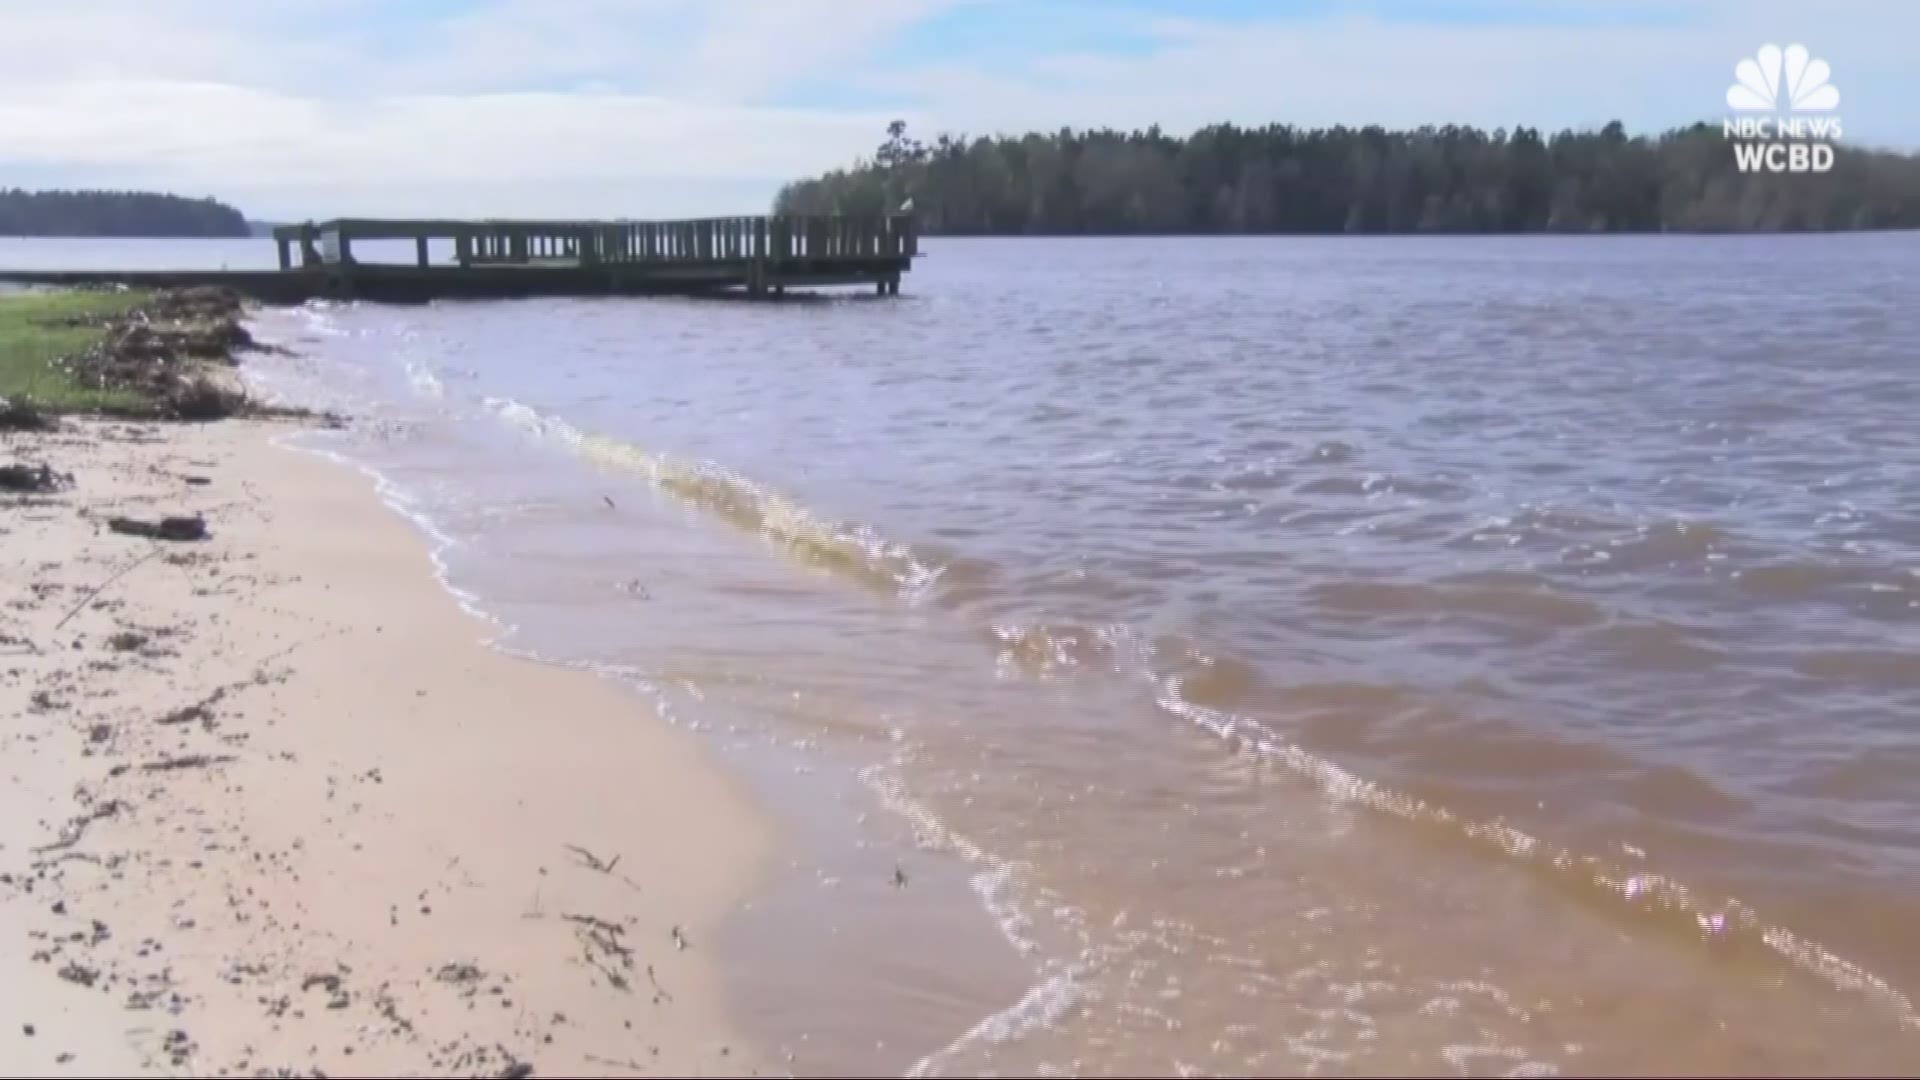 One South Carolina man found himself in a hospital bed after taking a dip in the lake. Doctors say flesh-eating bacteria almost caused his arm to explode.